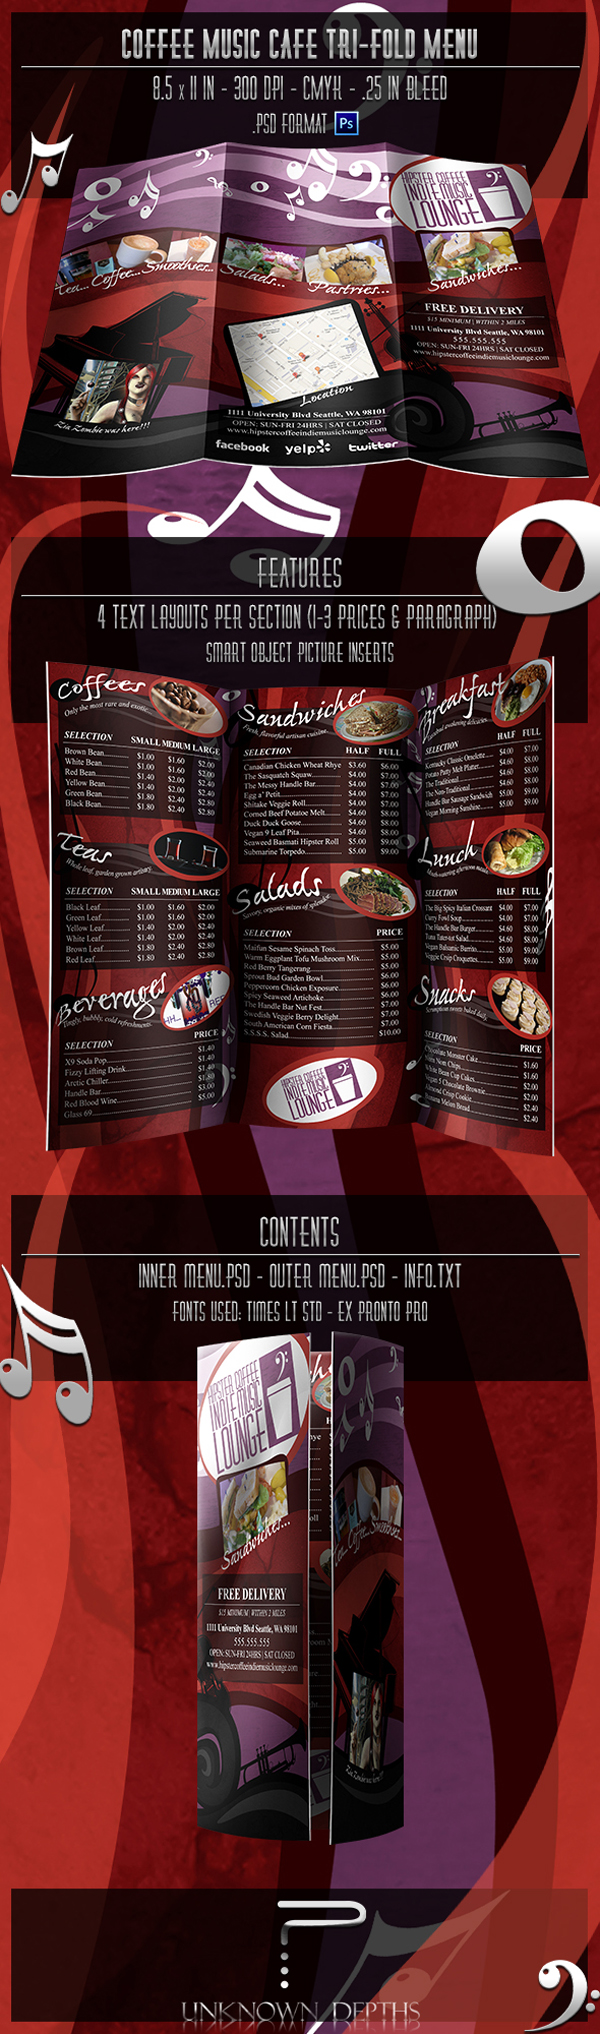 coffee_music_cafe_menu_by_causethought-d6i6thp